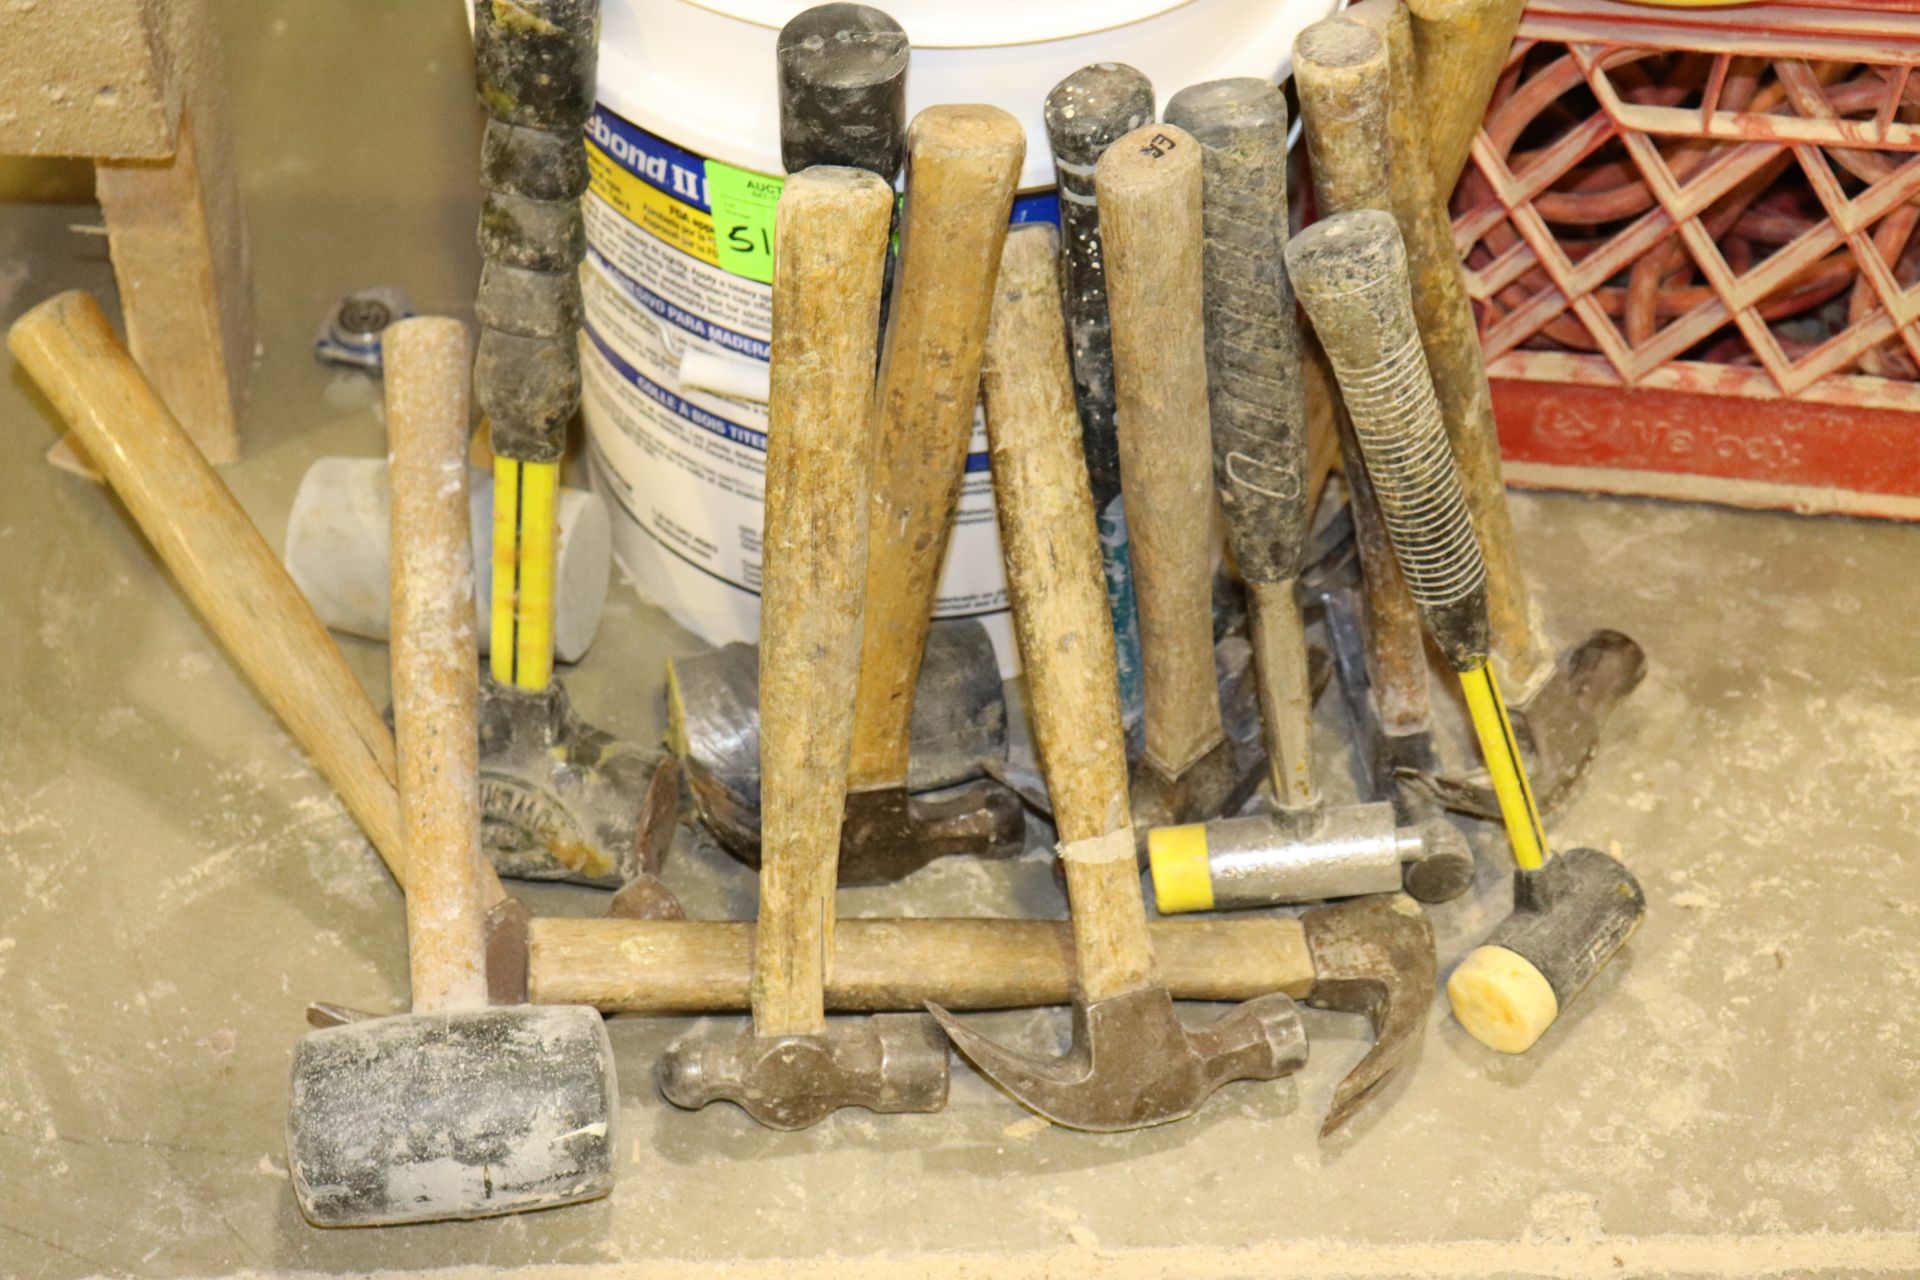 Miscellaneous mallets and hammer in barrel